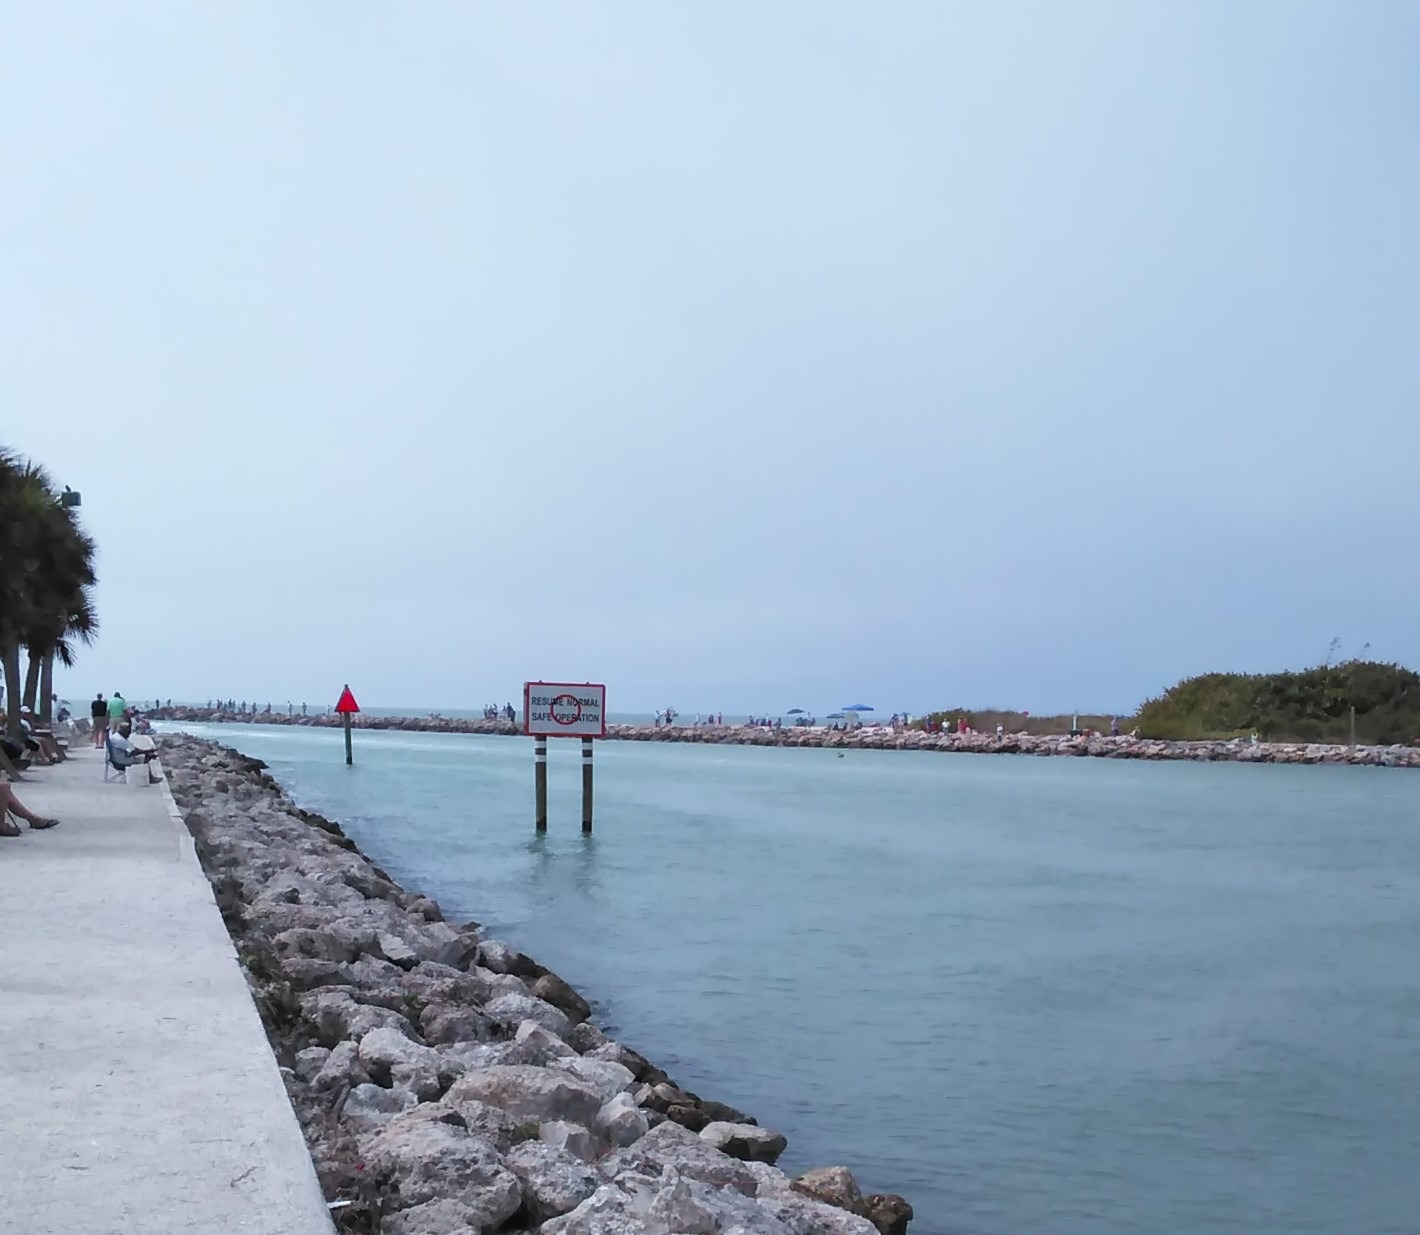  piers forming the Venice Jetty